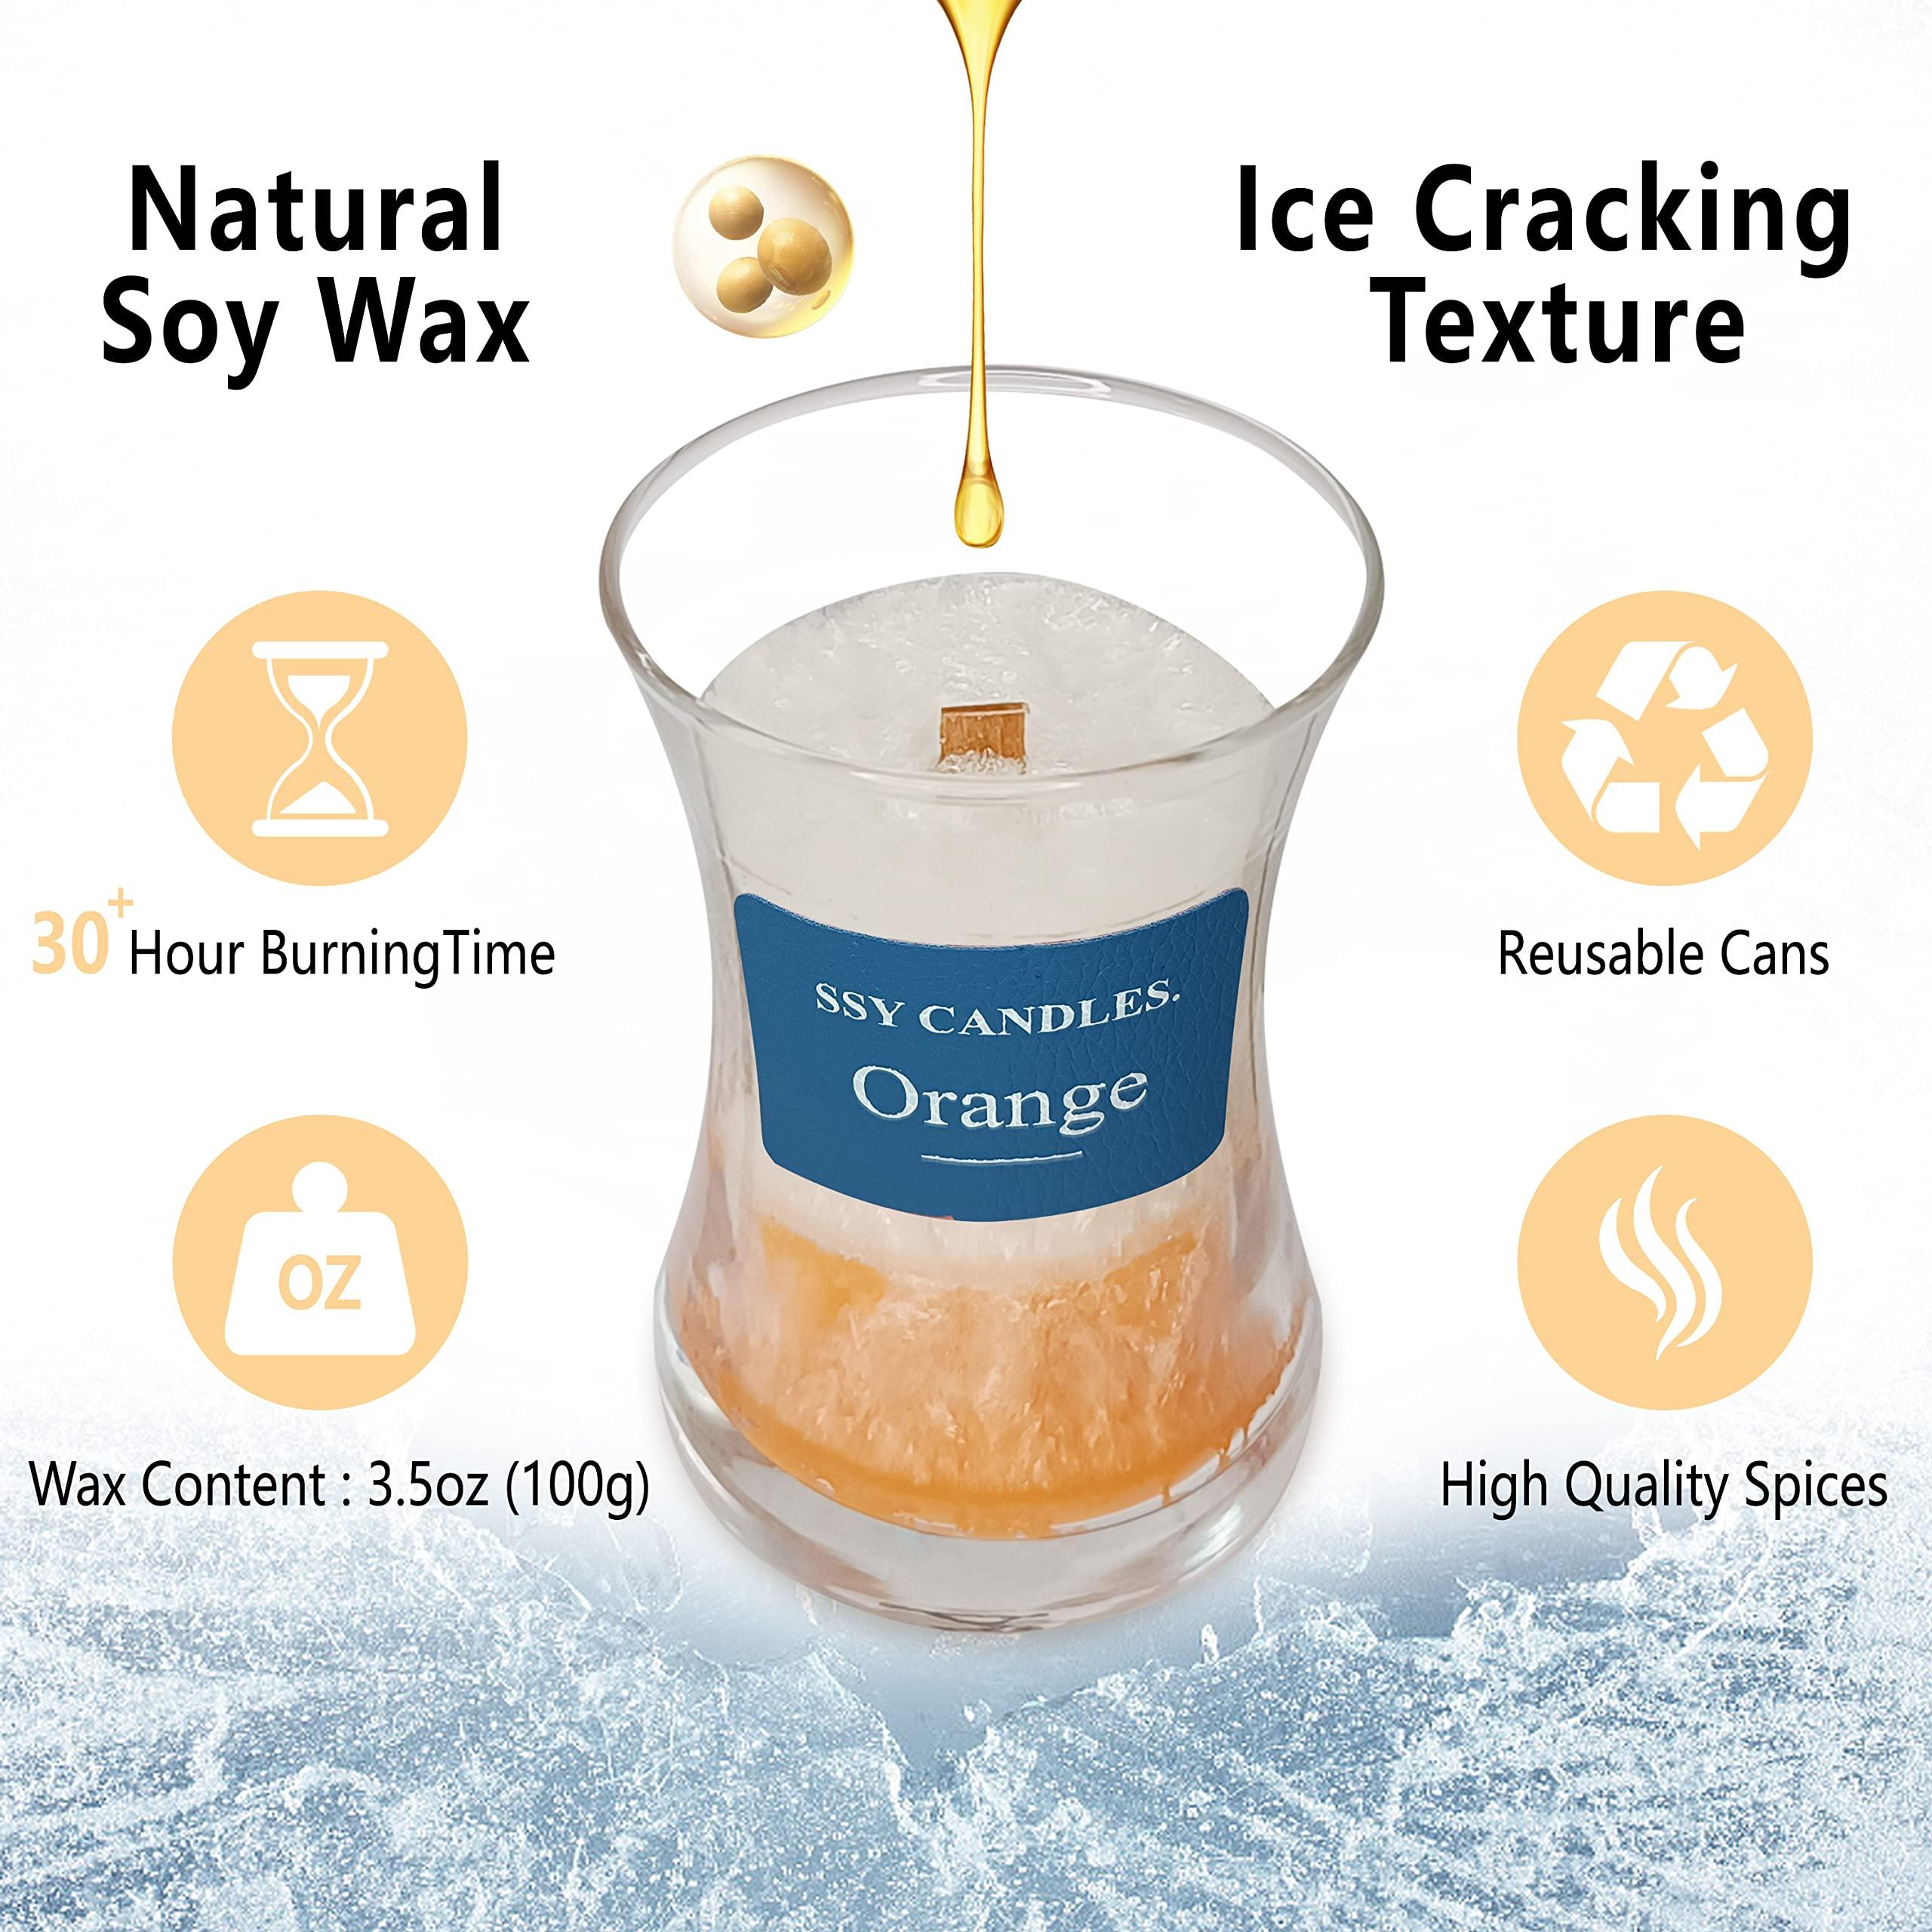 Experience Relaxation with Our Scented Jar Candle - 100% Natural Soy Wax, Burns up to 45 Hours, Aromatherapy Candle Gift for Any Occasion (#14 Single Lavender) 2